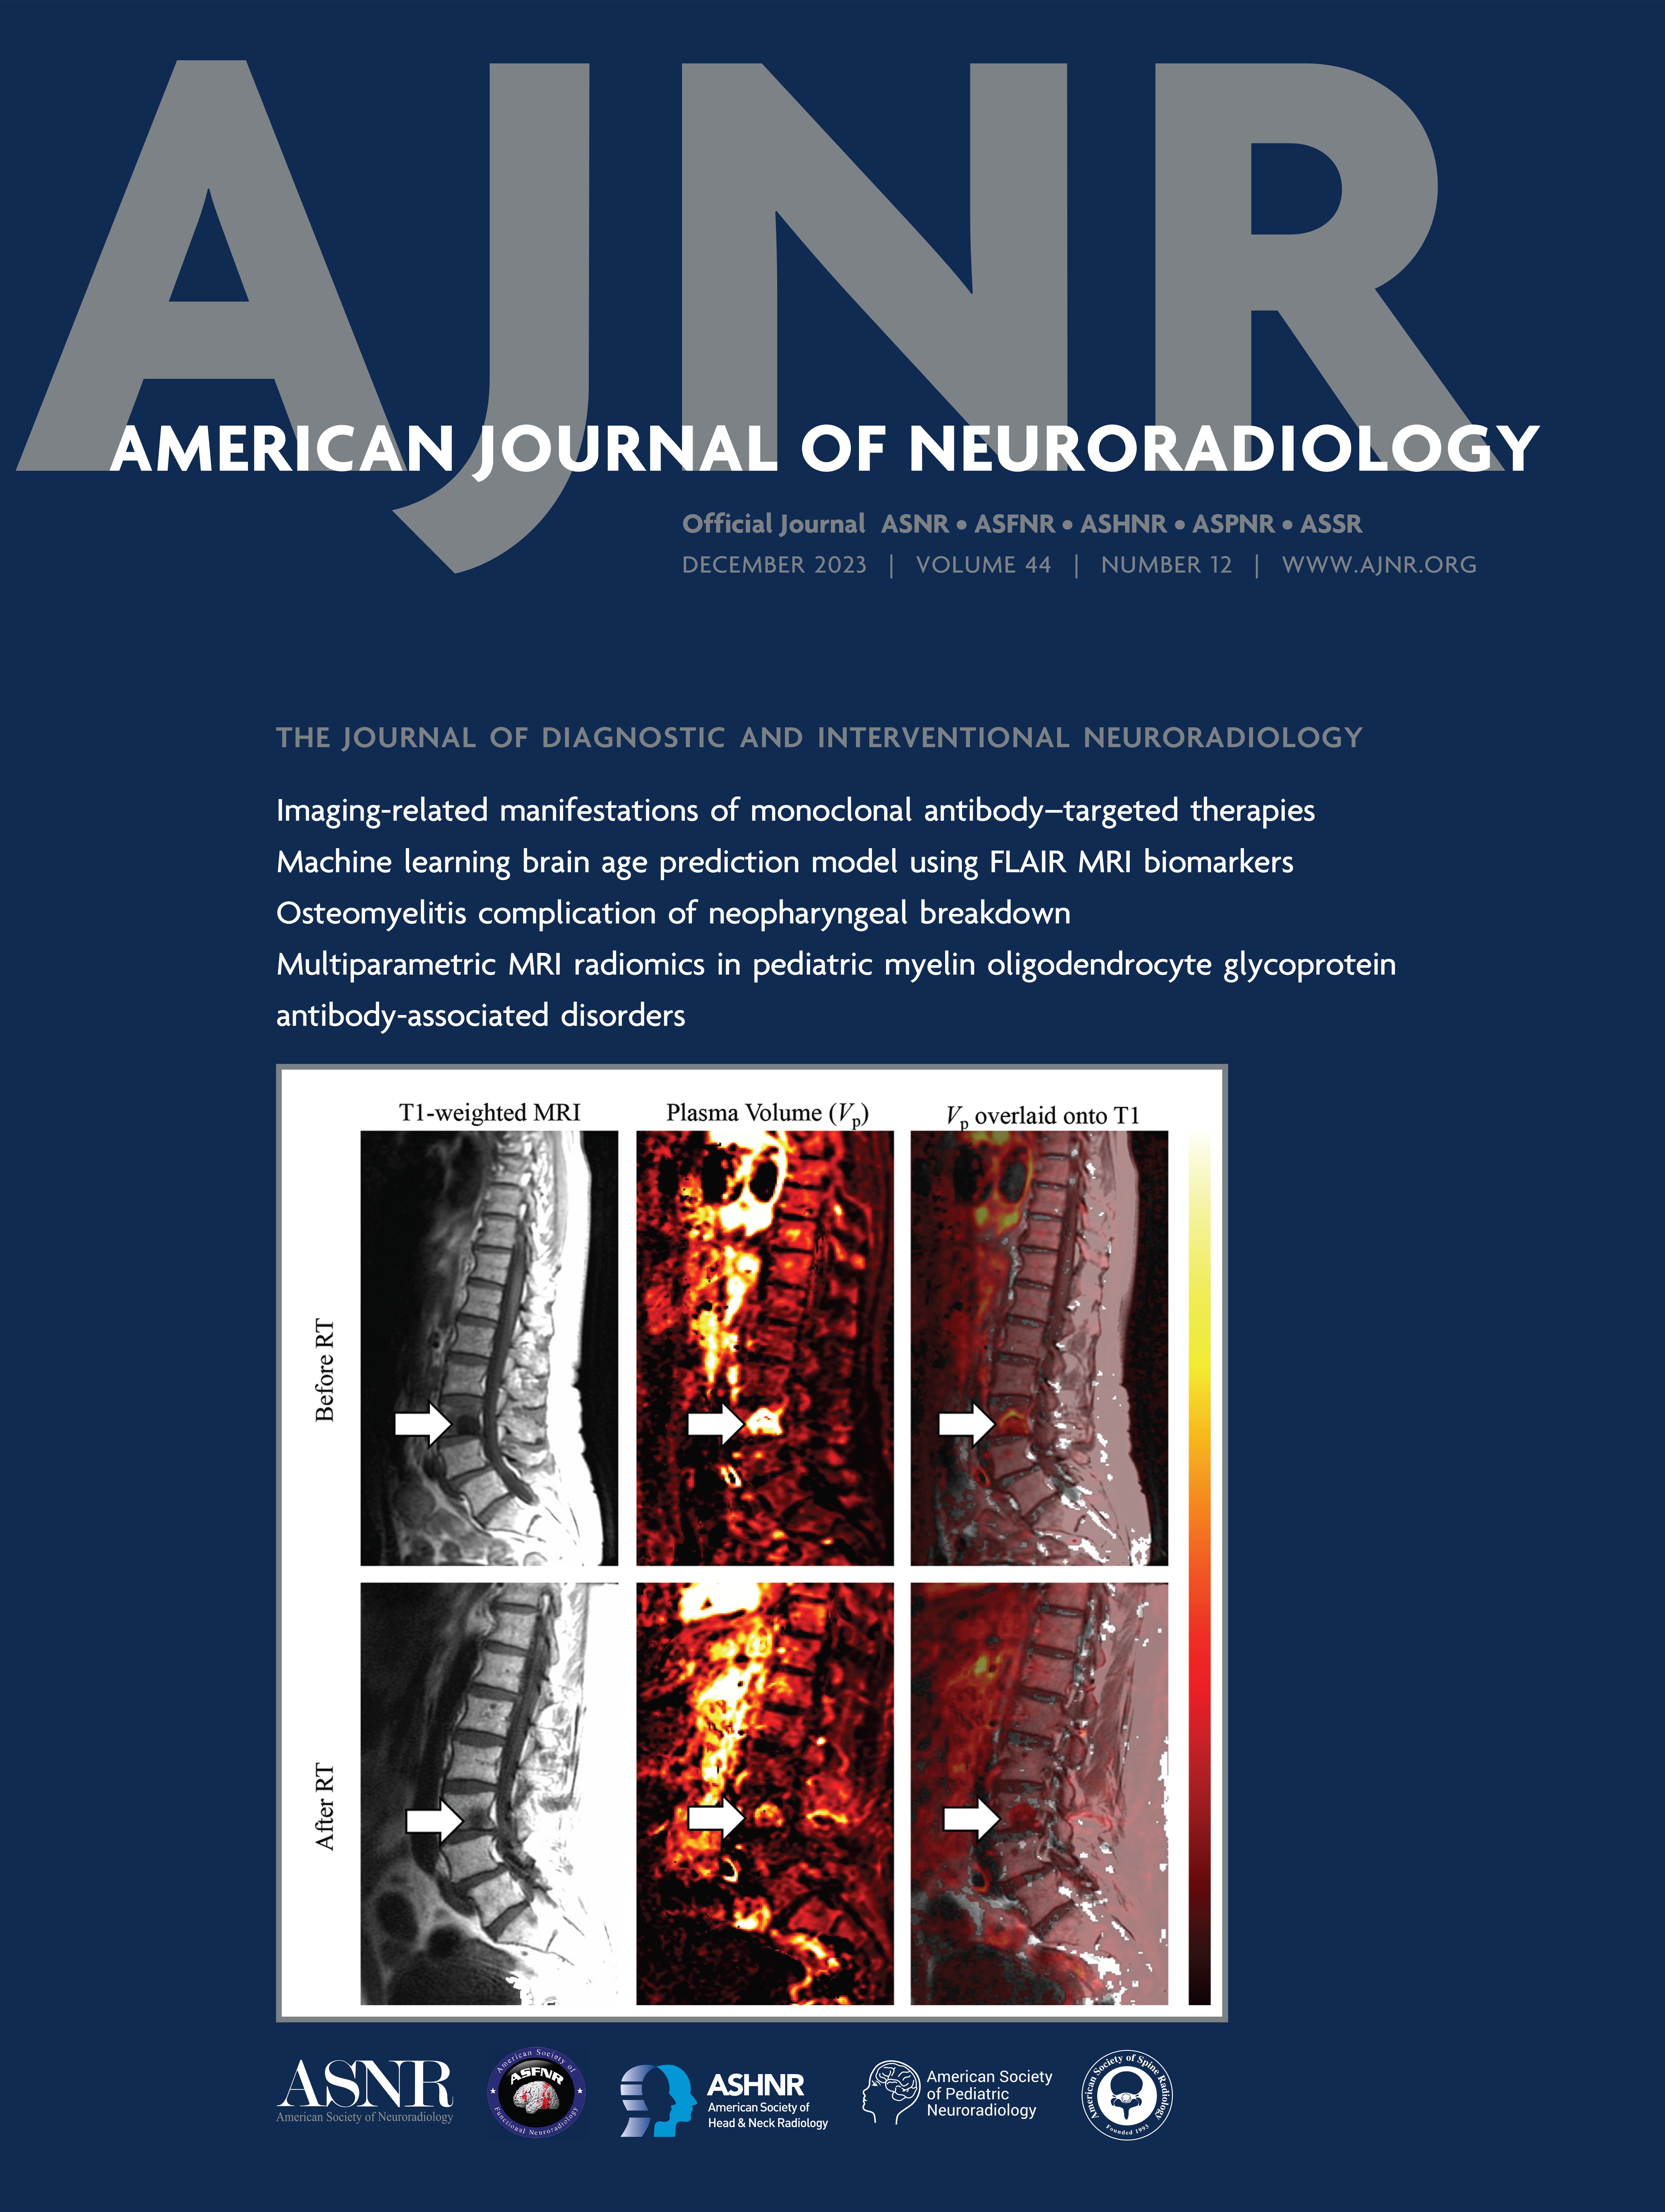 Comparison of Quantitative Hippocampal Volumes and Structured Scoring Scales in Predicting Alzheimer Disease Diagnosis [NEURODEGENERATIVE DISORDER IMAGING]